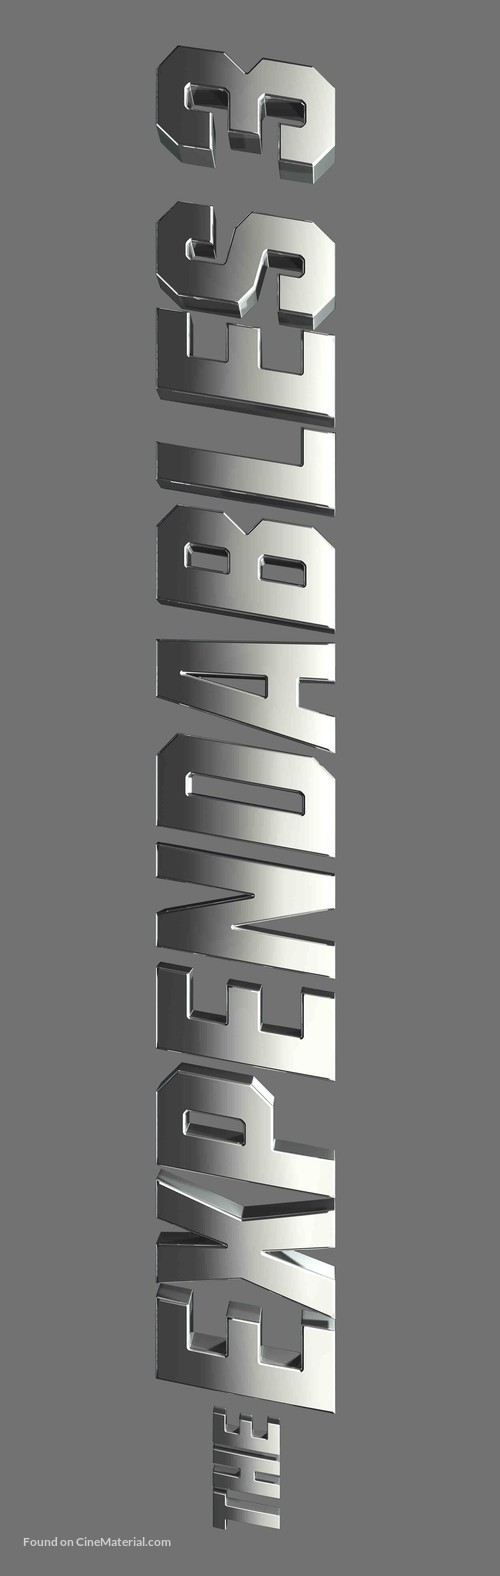 The Expendables 3 - Logo